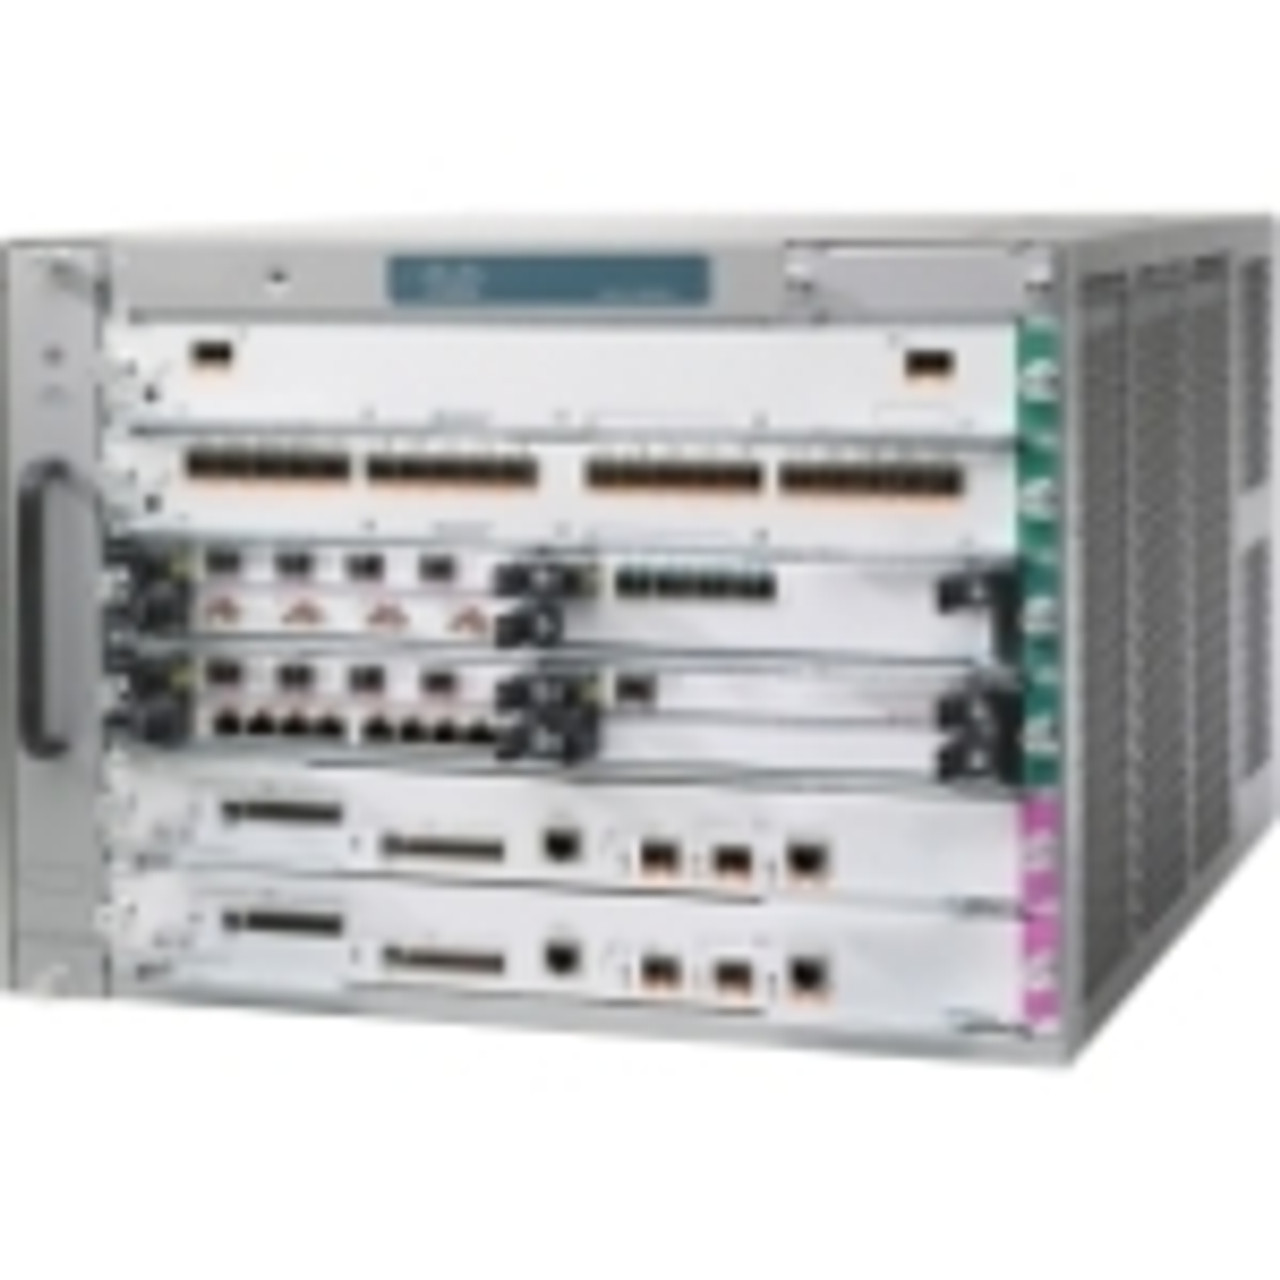 7606S-RSP7XL-10G-R Cisco 7606-S Router Chassis 10 Slots 7U Rack-mountable (Refurbished)